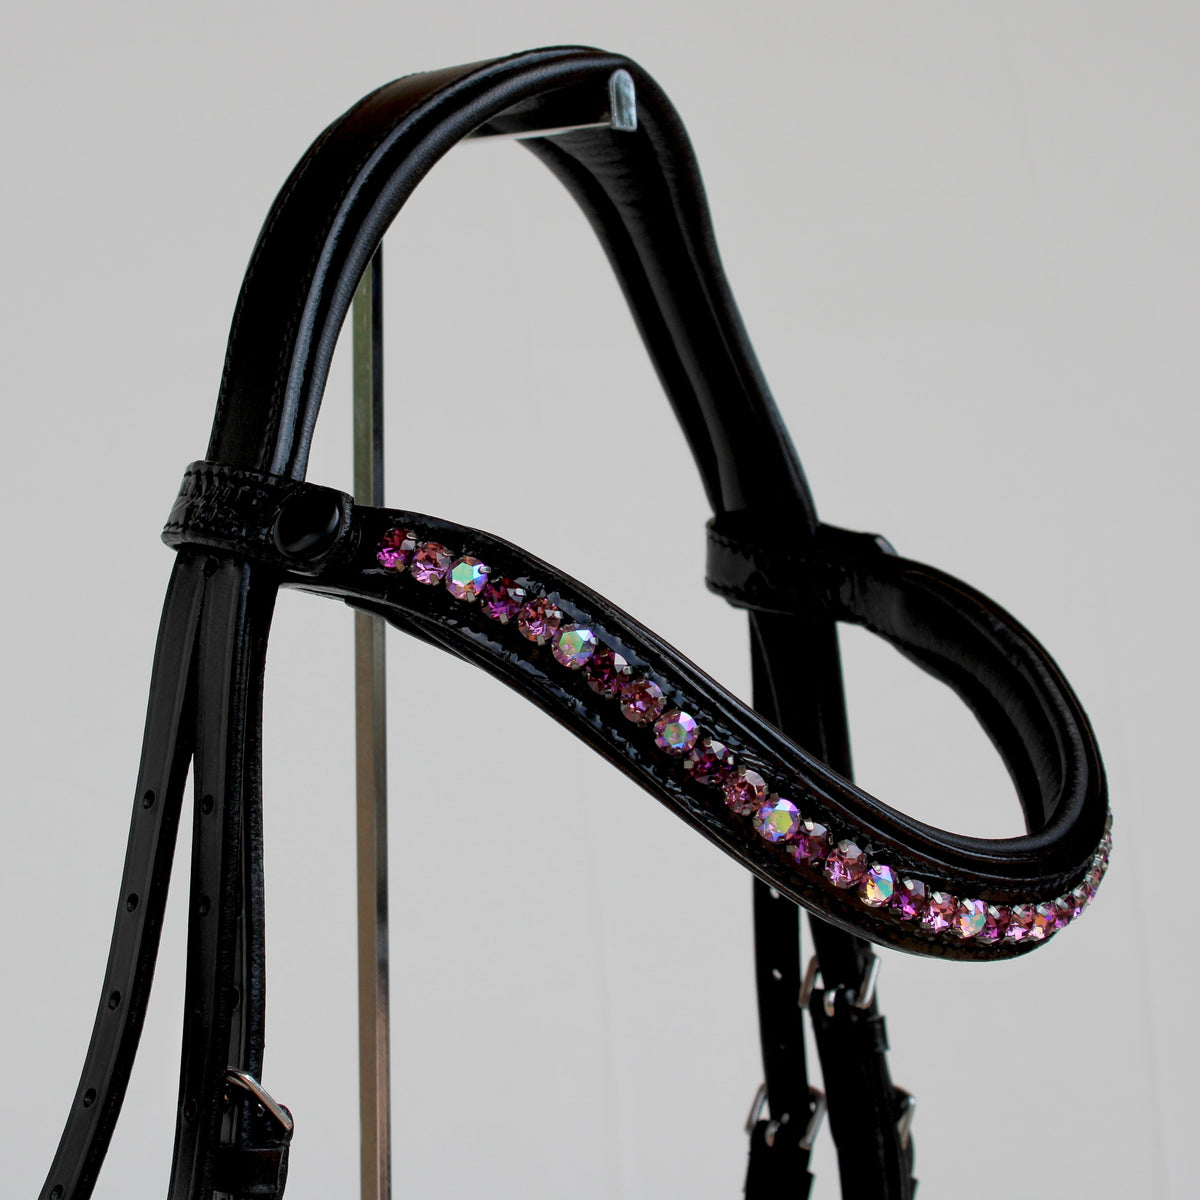 The Mulberry Black Patent Leather Snaffle Bridle